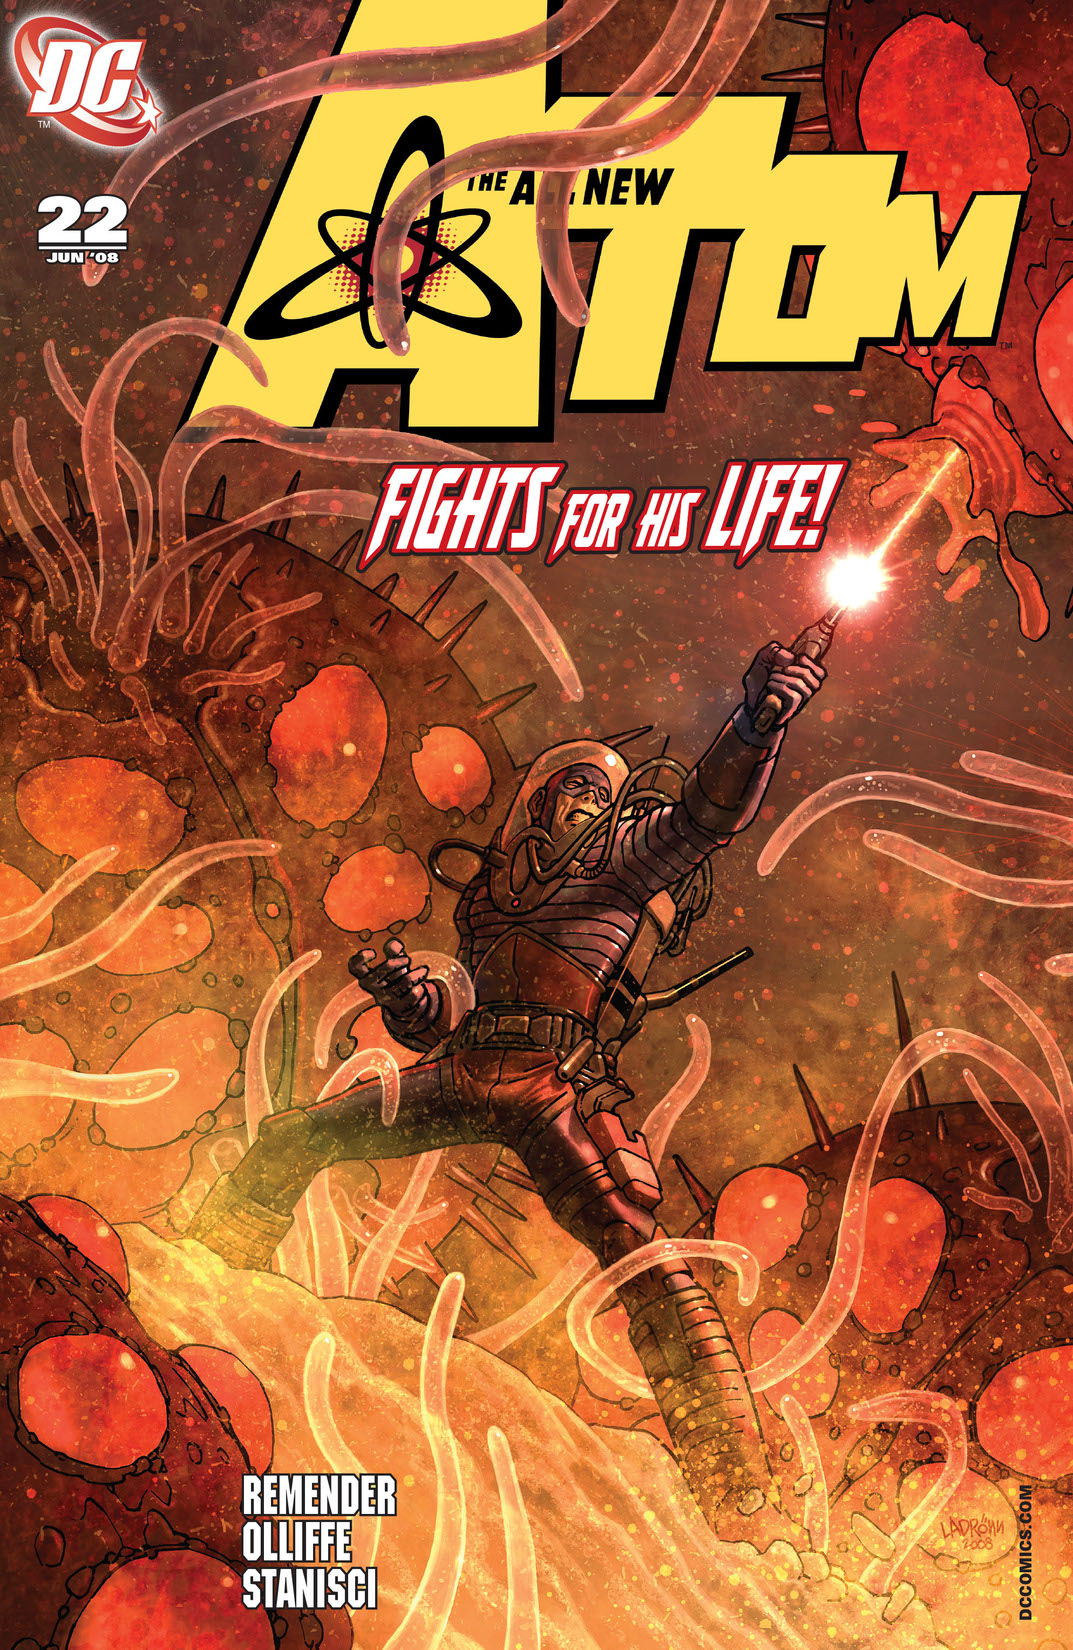 The All New Atom #22 preview images